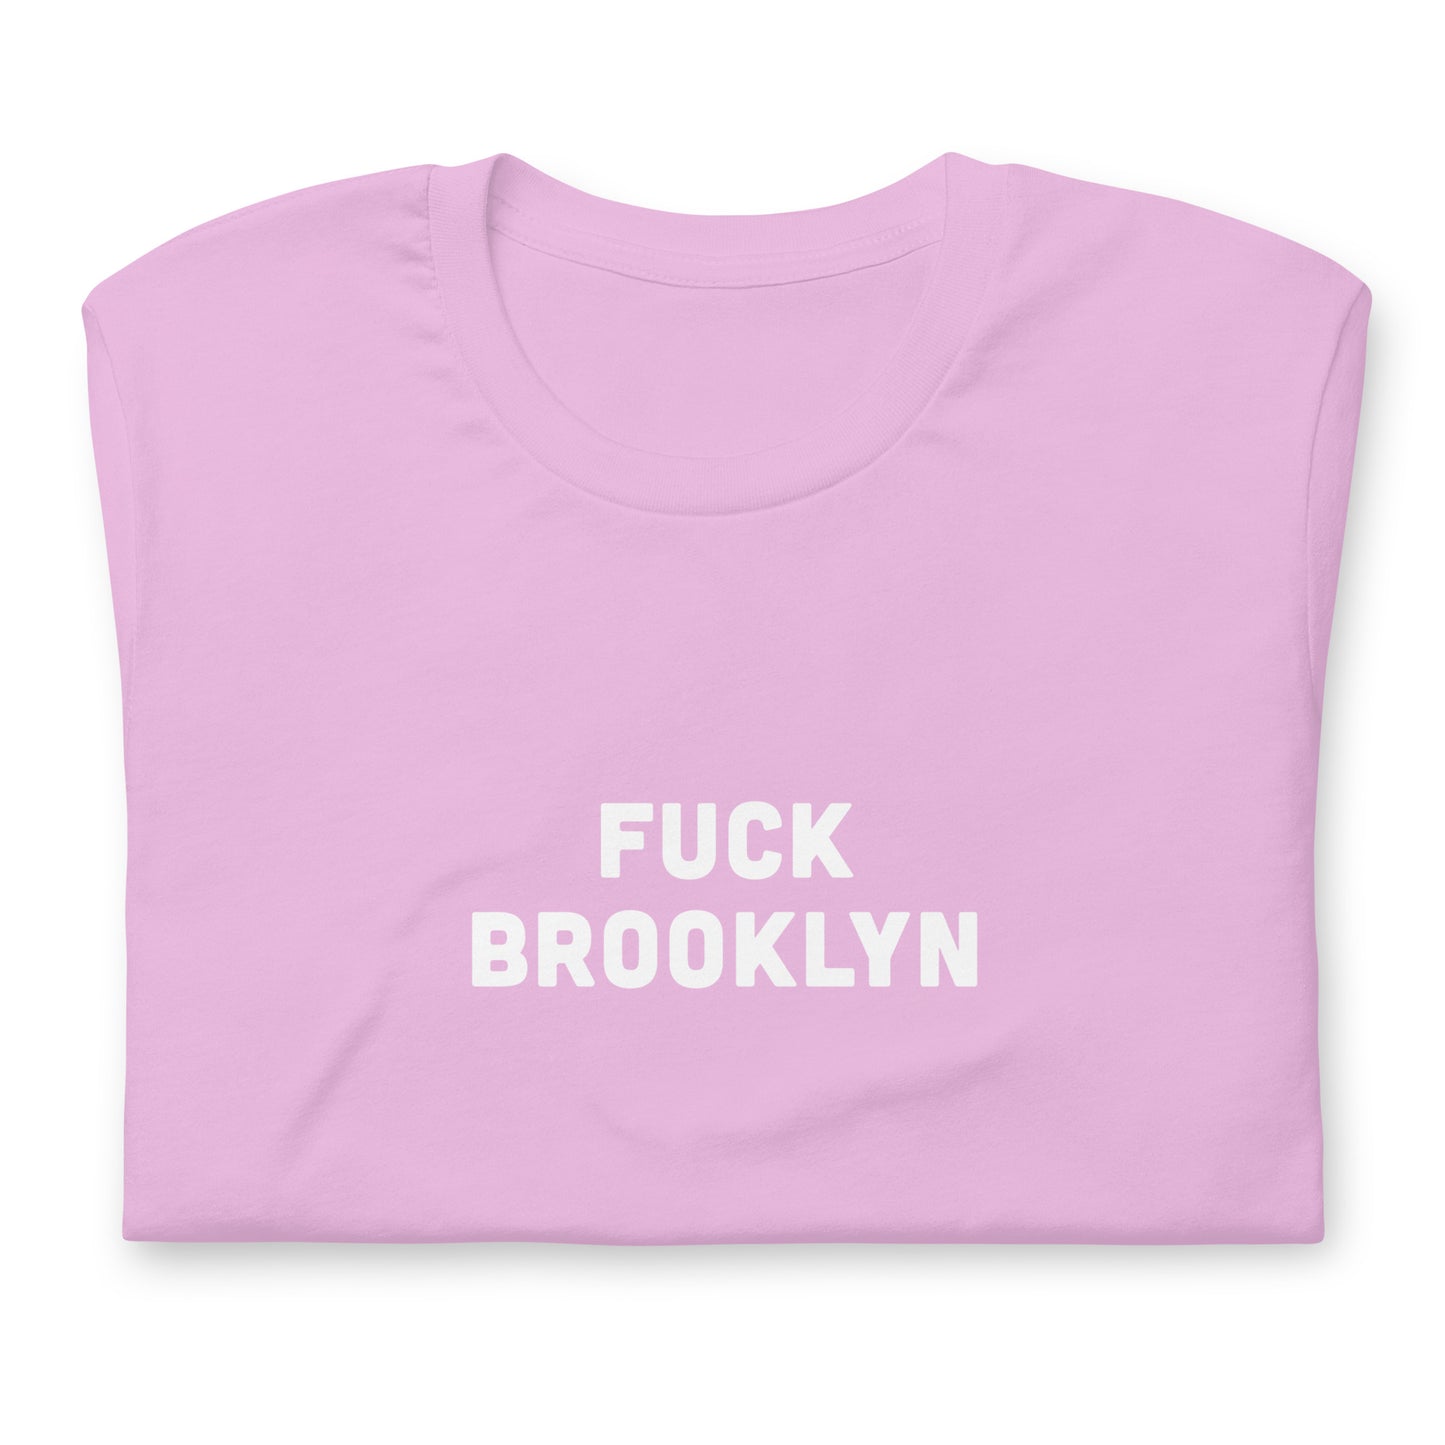 Fuck Brooklyn T-Shirt Size 2XL Color Forest